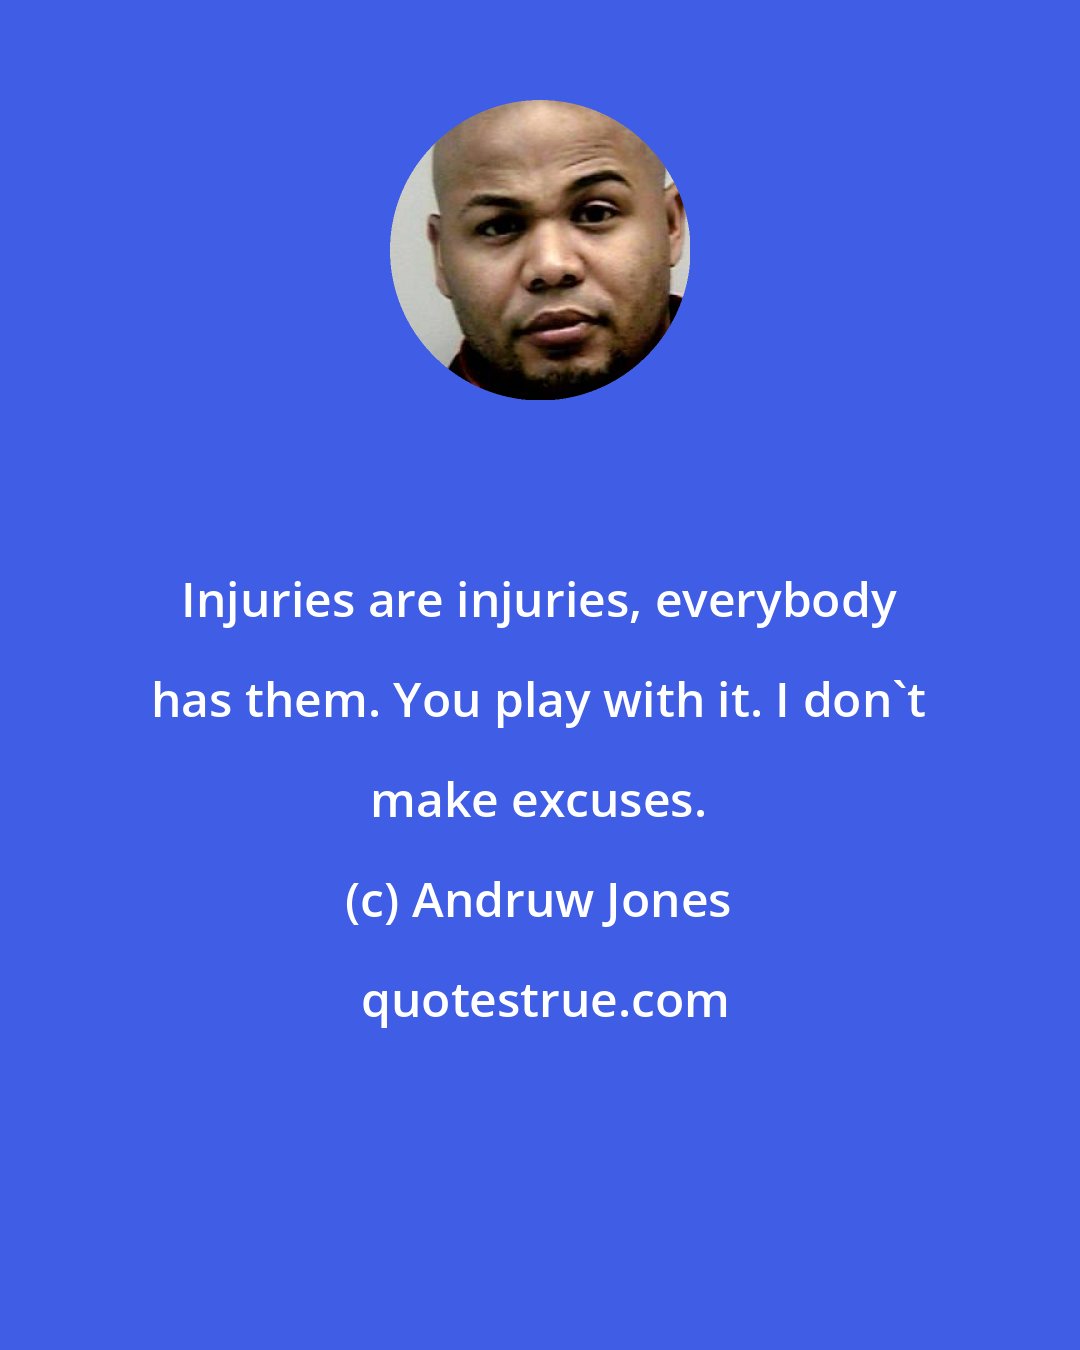 Andruw Jones: Injuries are injuries, everybody has them. You play with it. I don't make excuses.